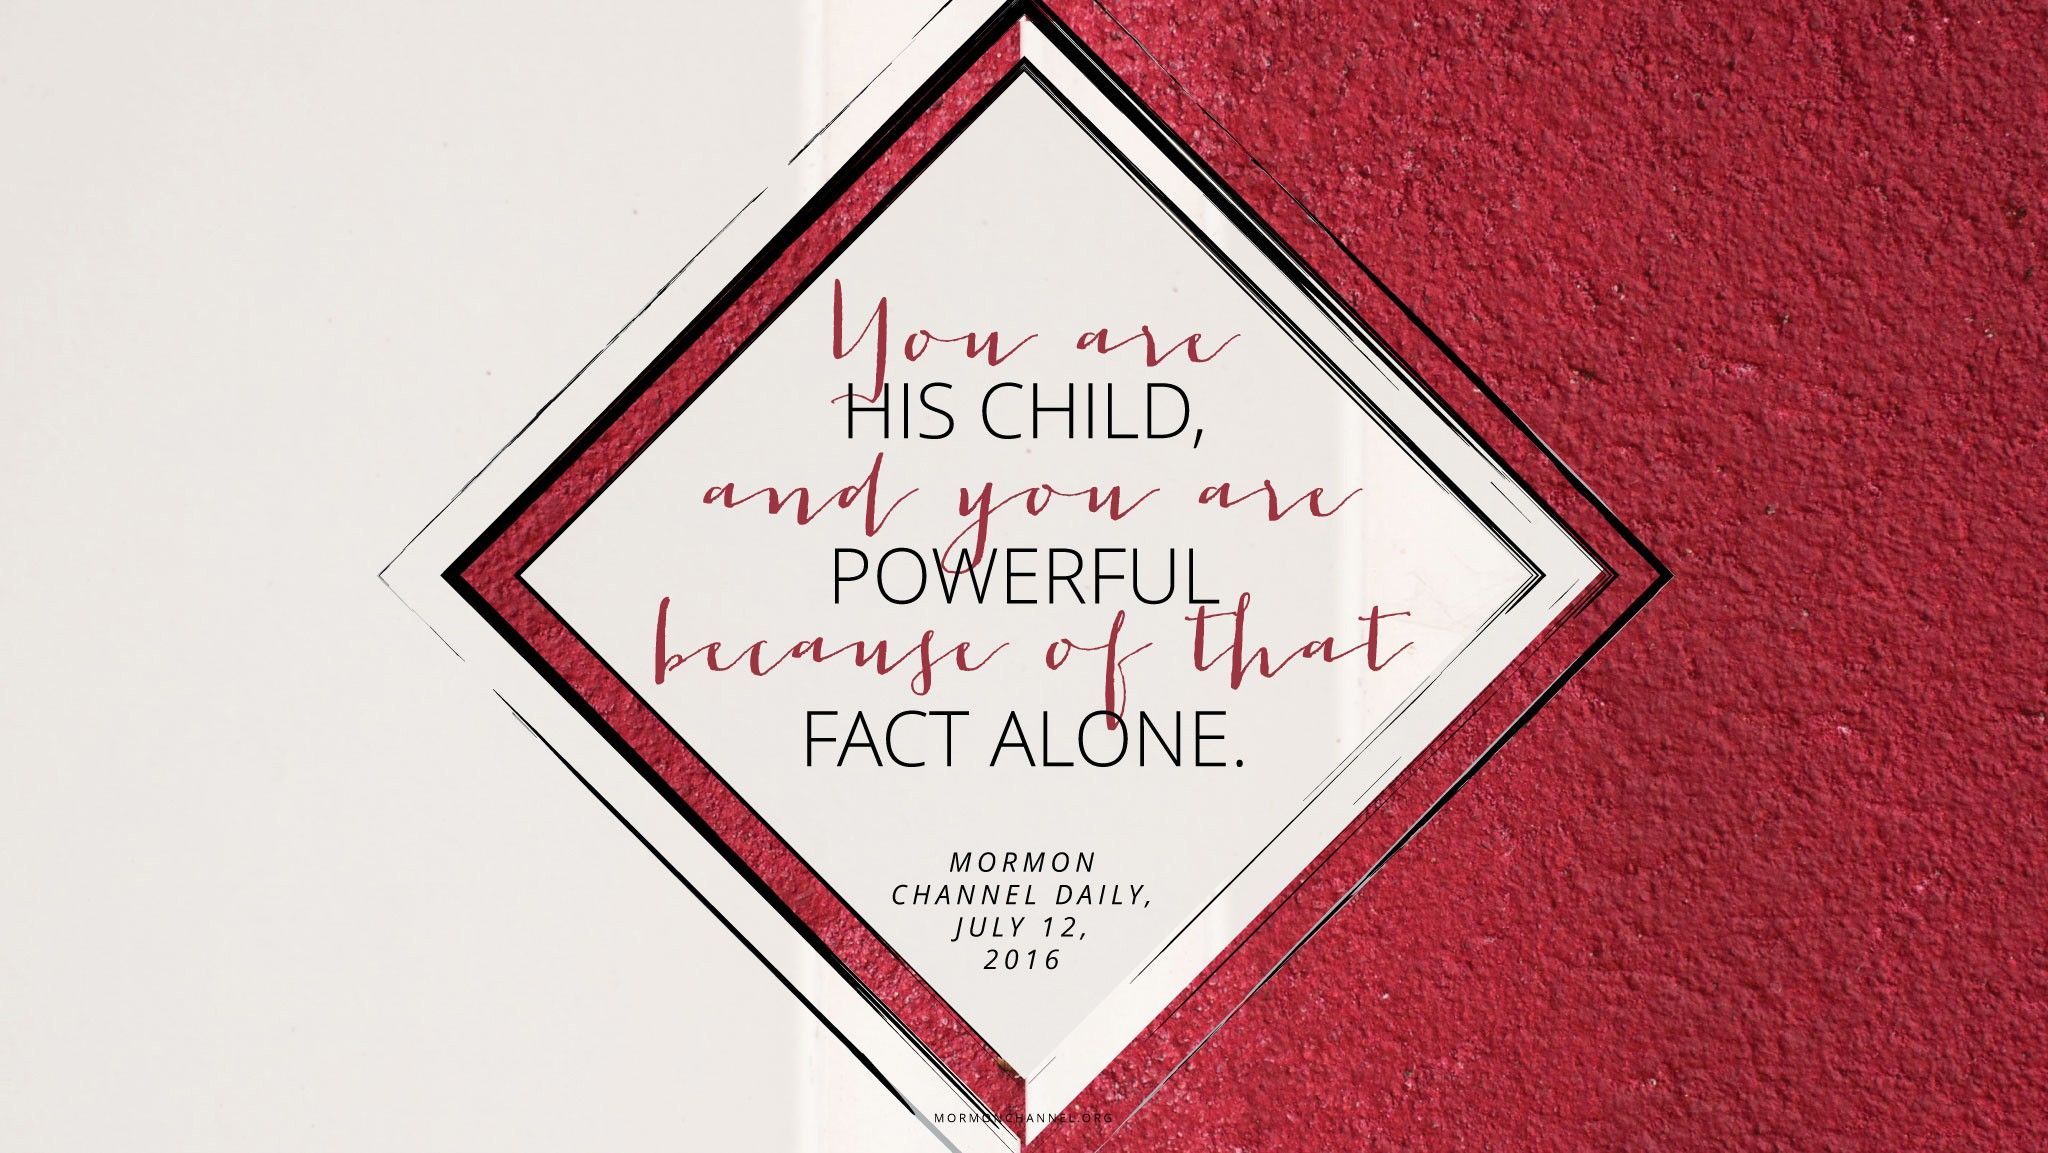 “You are His child, and you are powerful because of that fact alone.”—Mormon Channel Daily